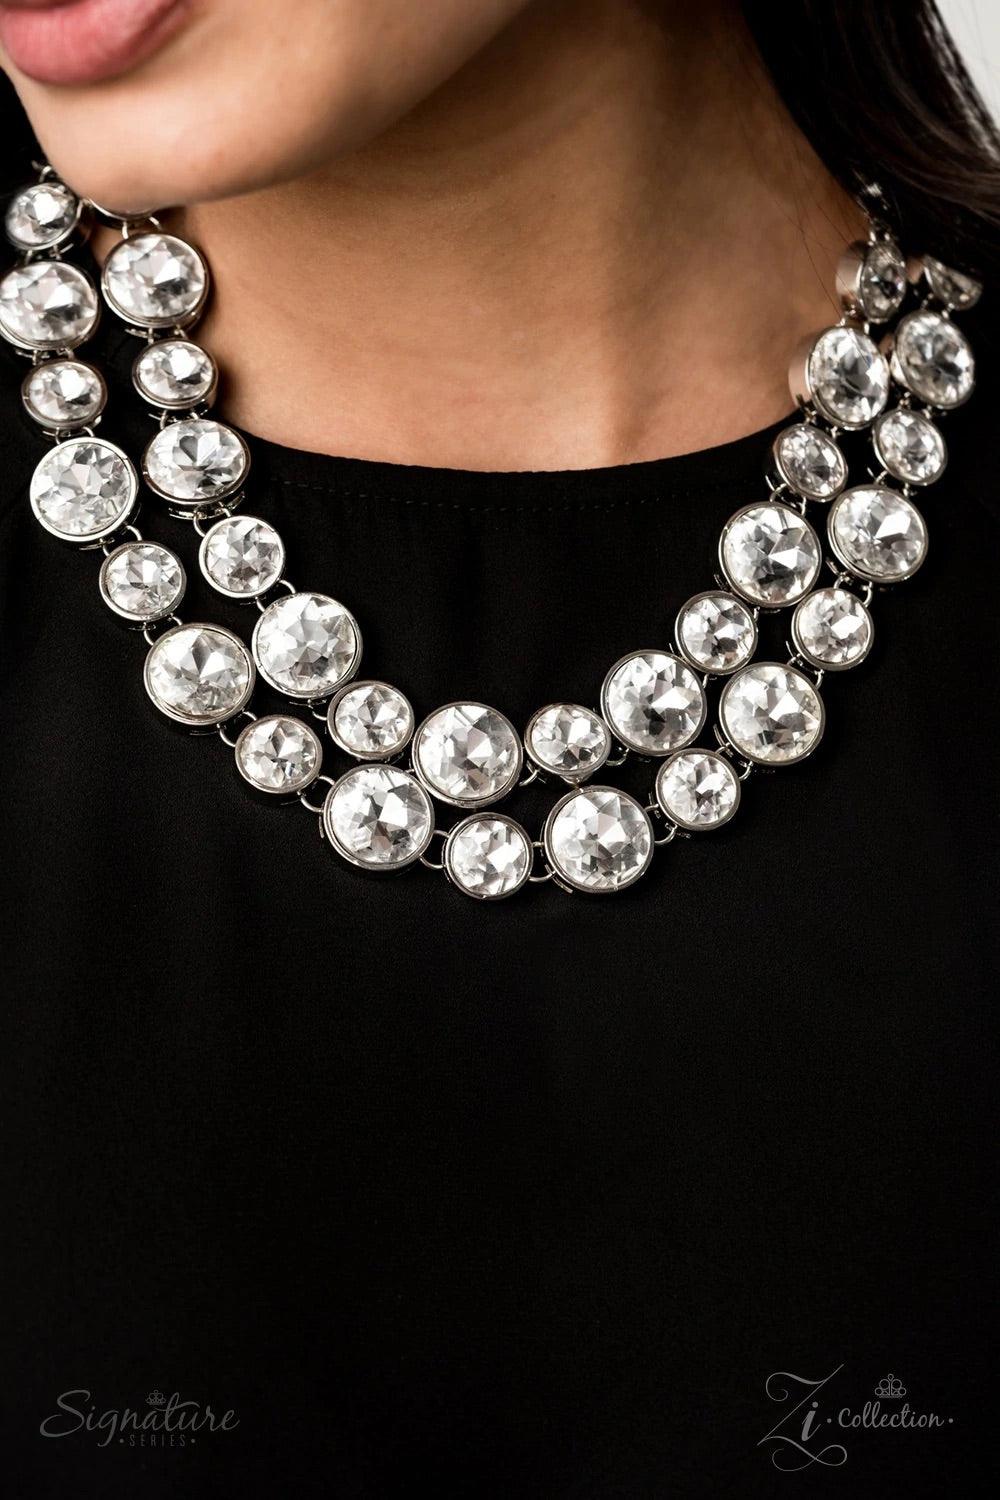 Paparazzi Accessories The Natasha Two rows of dramatically oversized rhinestones sparkle blindingly along the collar. The alternating sizes of the gems give this showstopper some exaggerated depth and dazzle. Features an adjustable clasp closure. 2019 ZiC